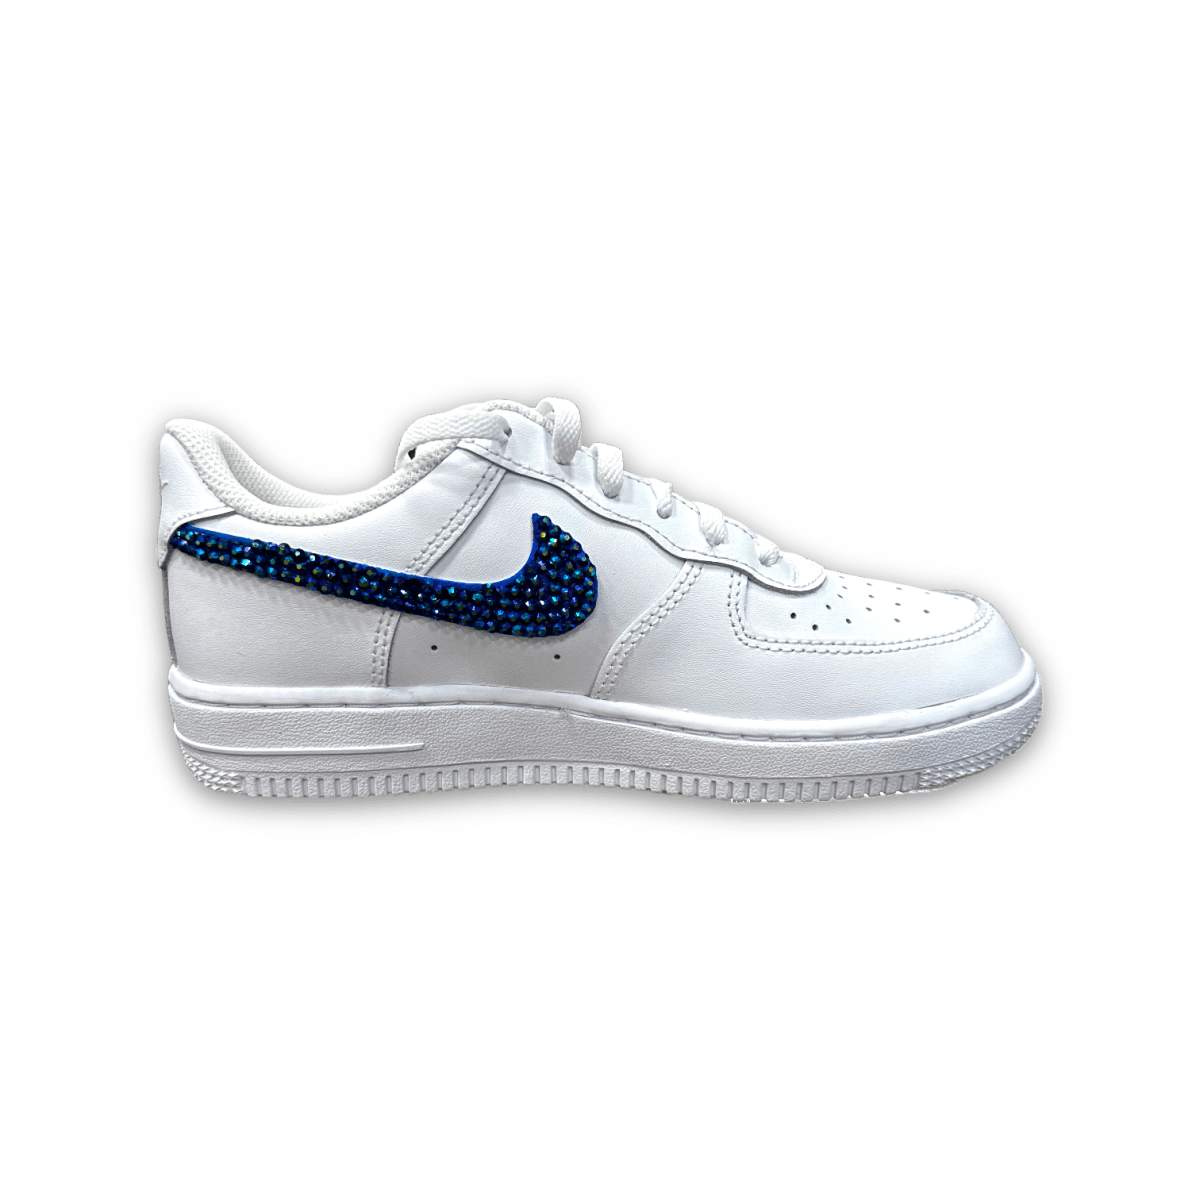 Blingy Jawn Air Force 1 Low '07 White Pre School 3 - Low Sneaker - Nike - Jawns on Fire